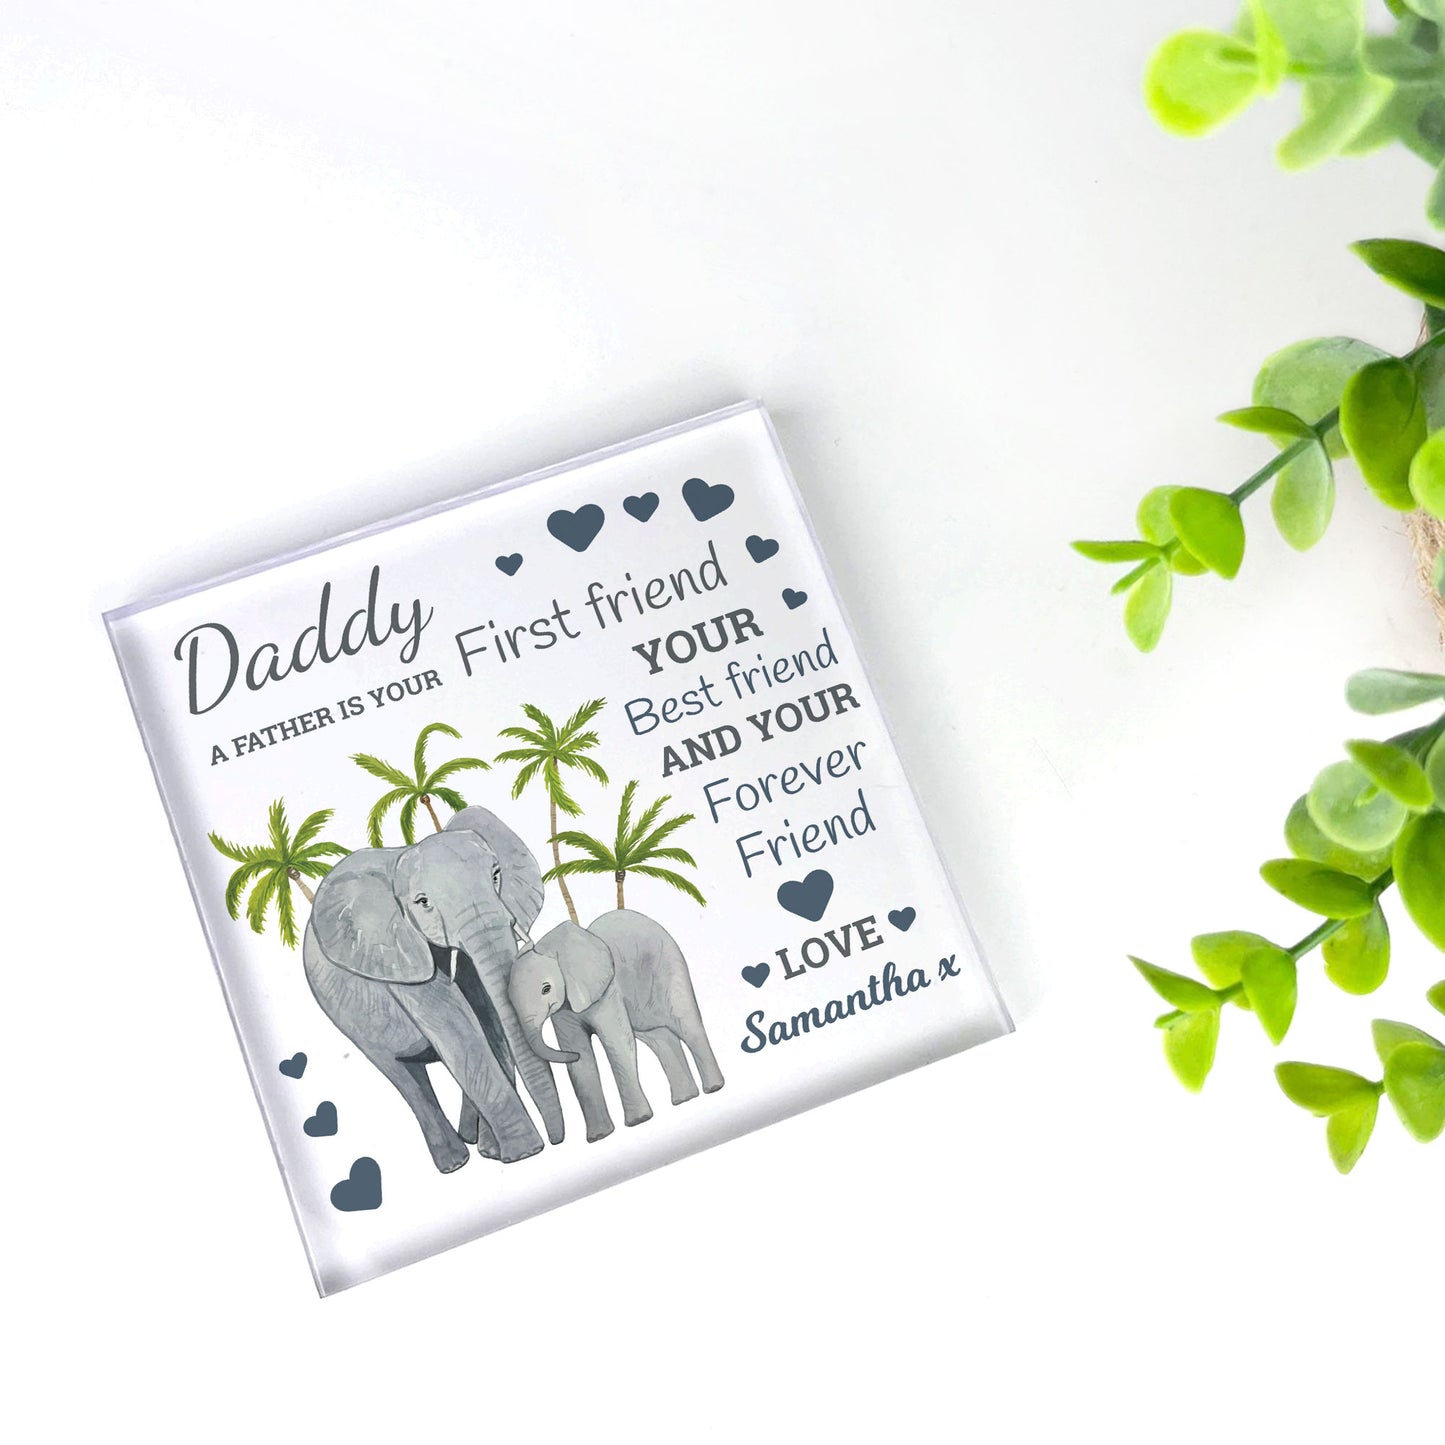 Fathers Day Gifts Dad Birthday Gift For Daddy Personalised